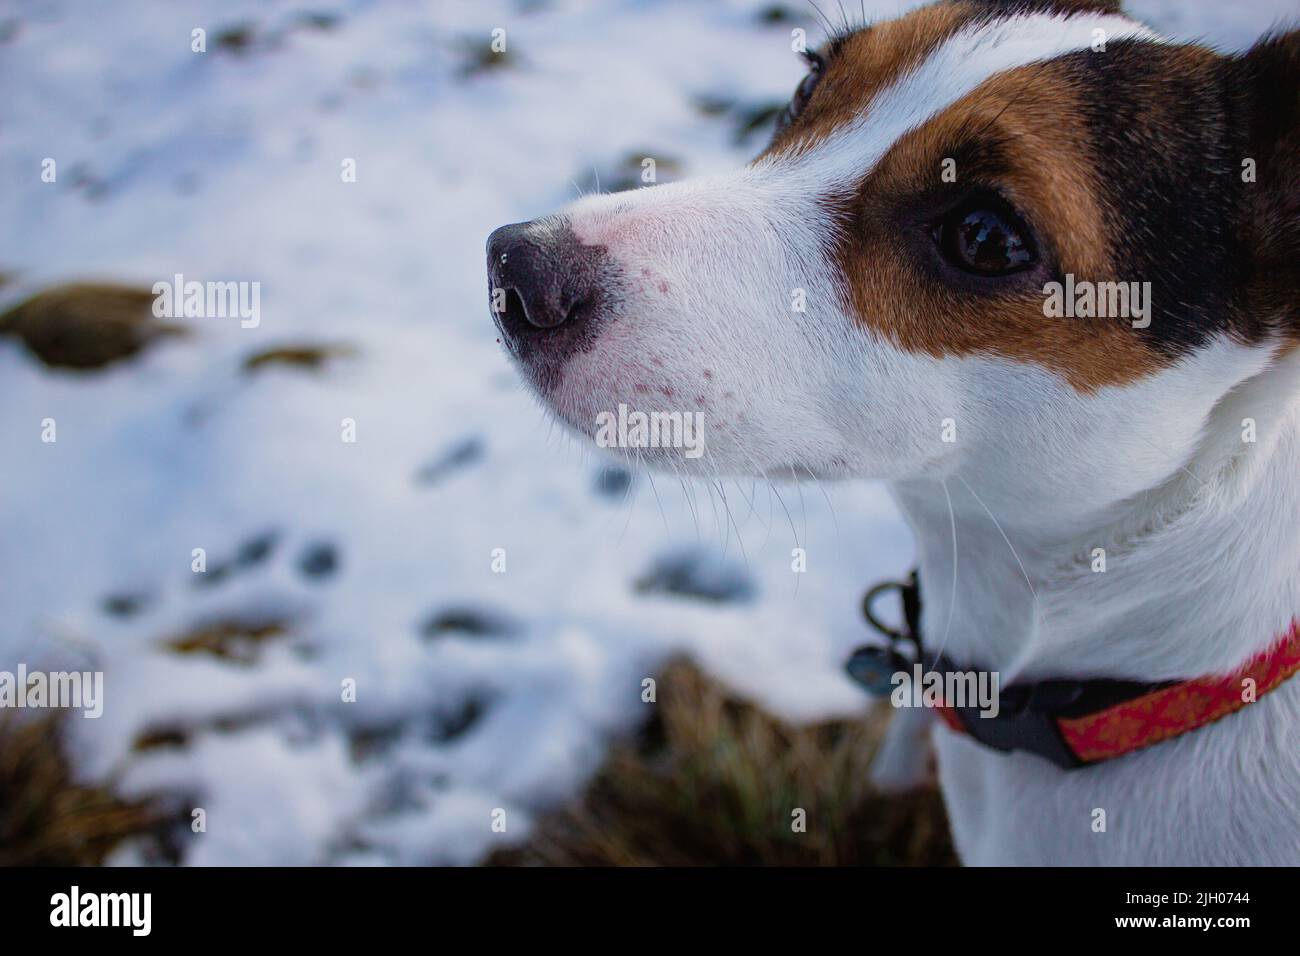 Close up image of the face of a young female Jack Russell Terrier dog Stock Photo